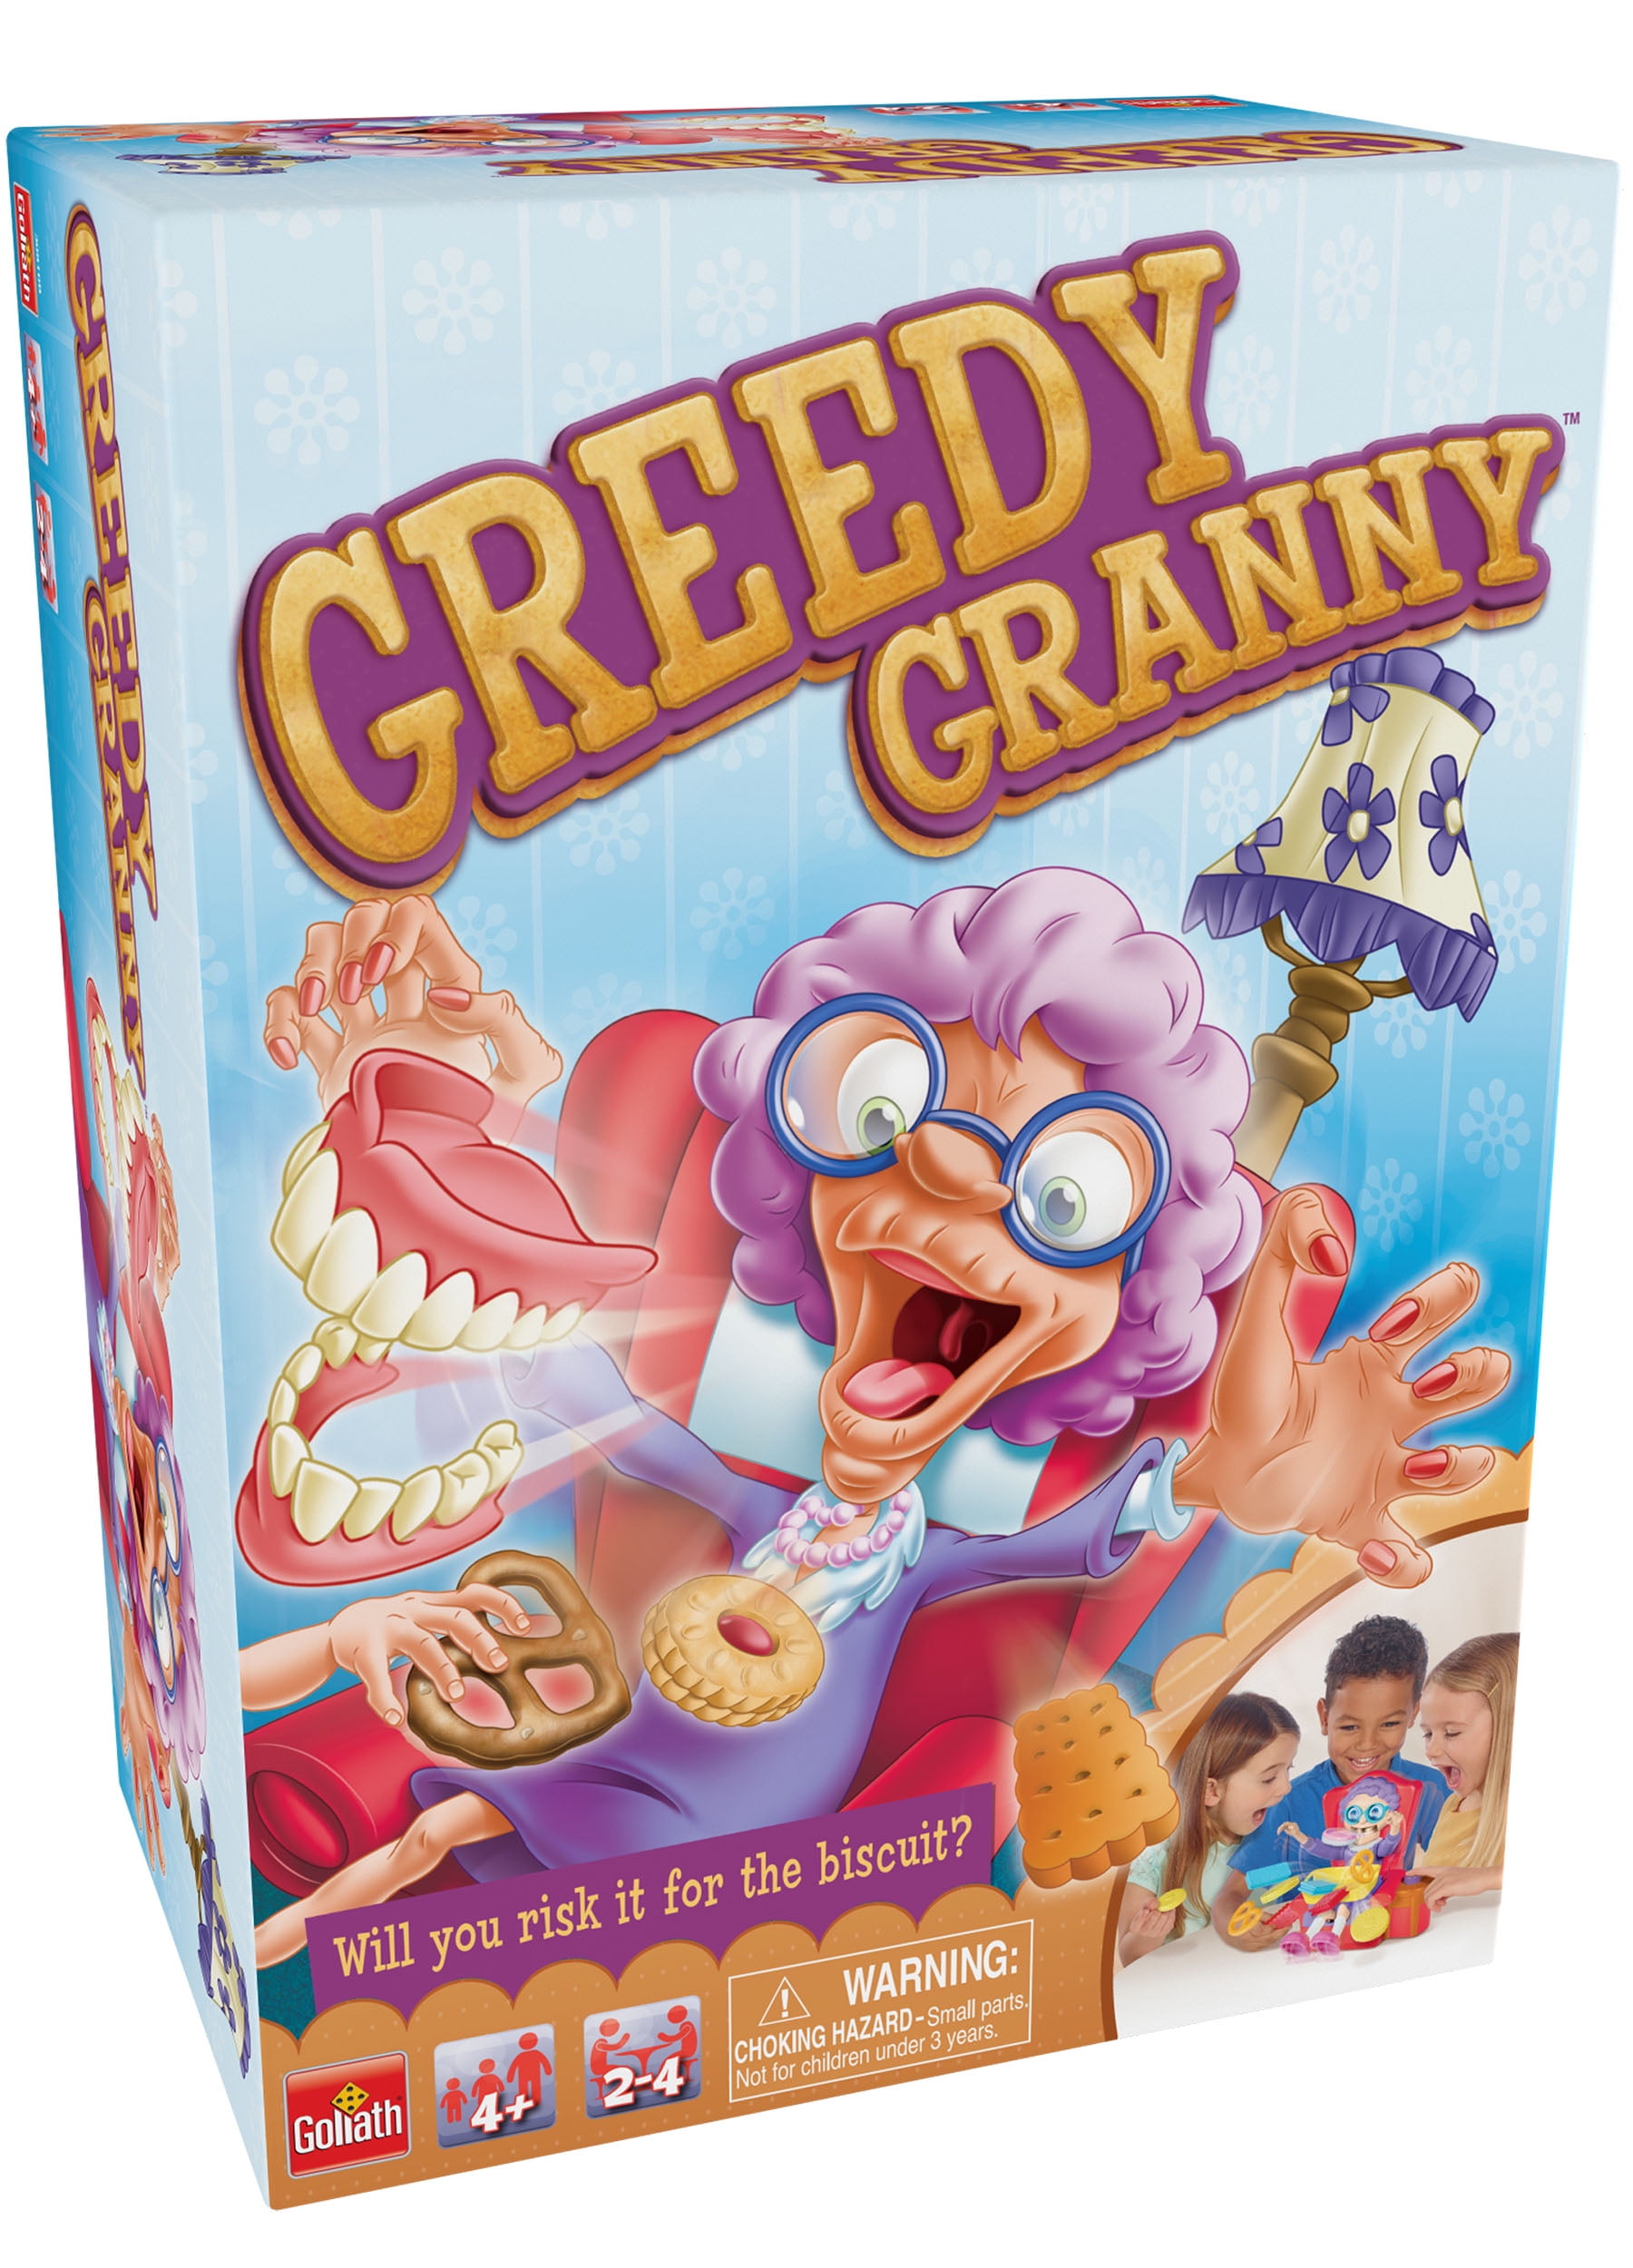 Greedy Granny Board Game Collect Biscuits Challenge Family Sleeping Don't Wake 